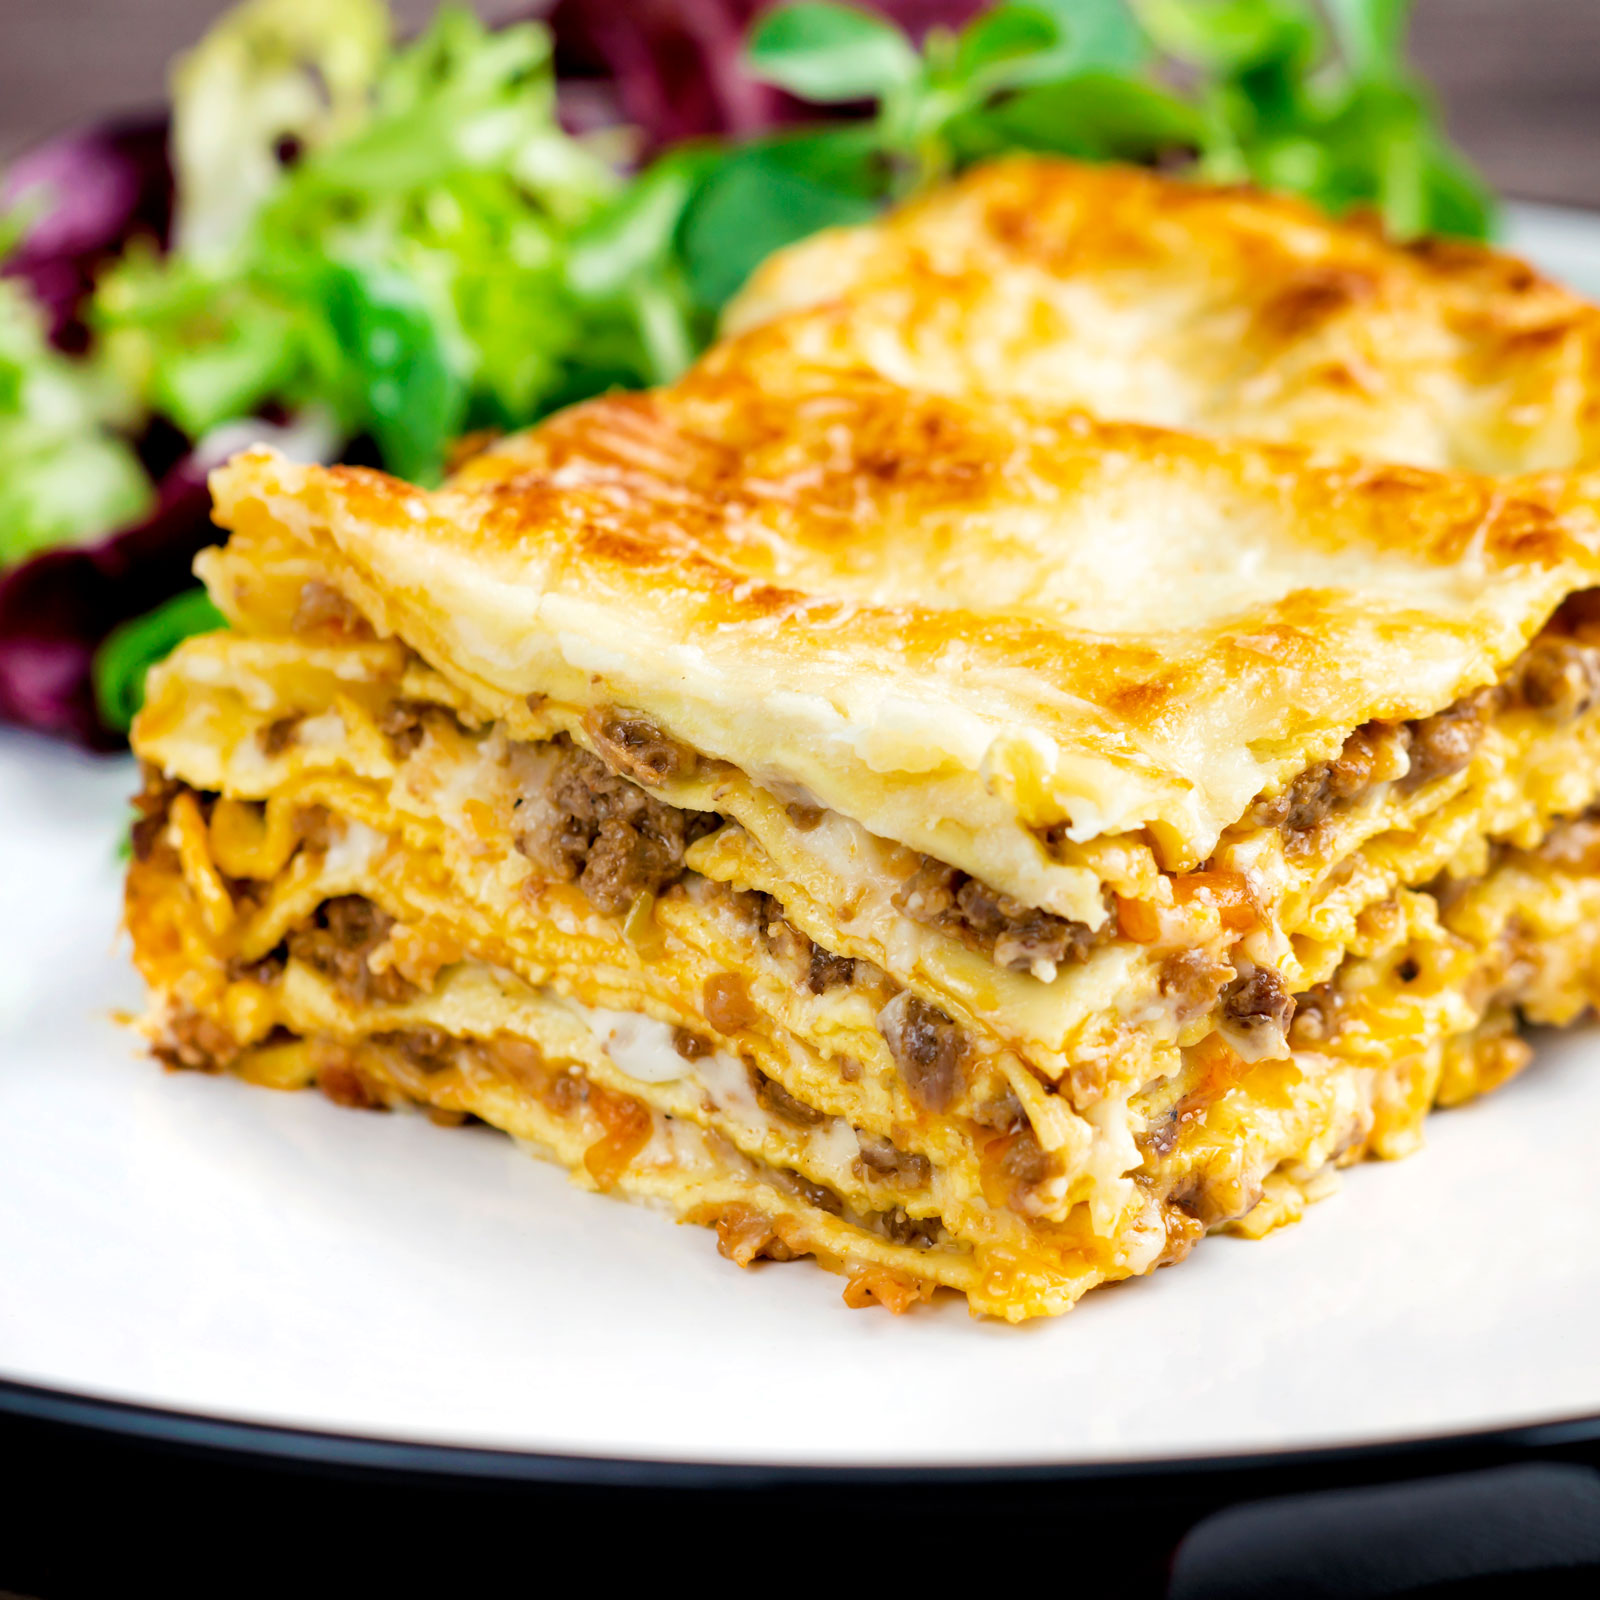 Perfectly layered lasagna bolognese with a crispy cheesy topping served with a side salad.